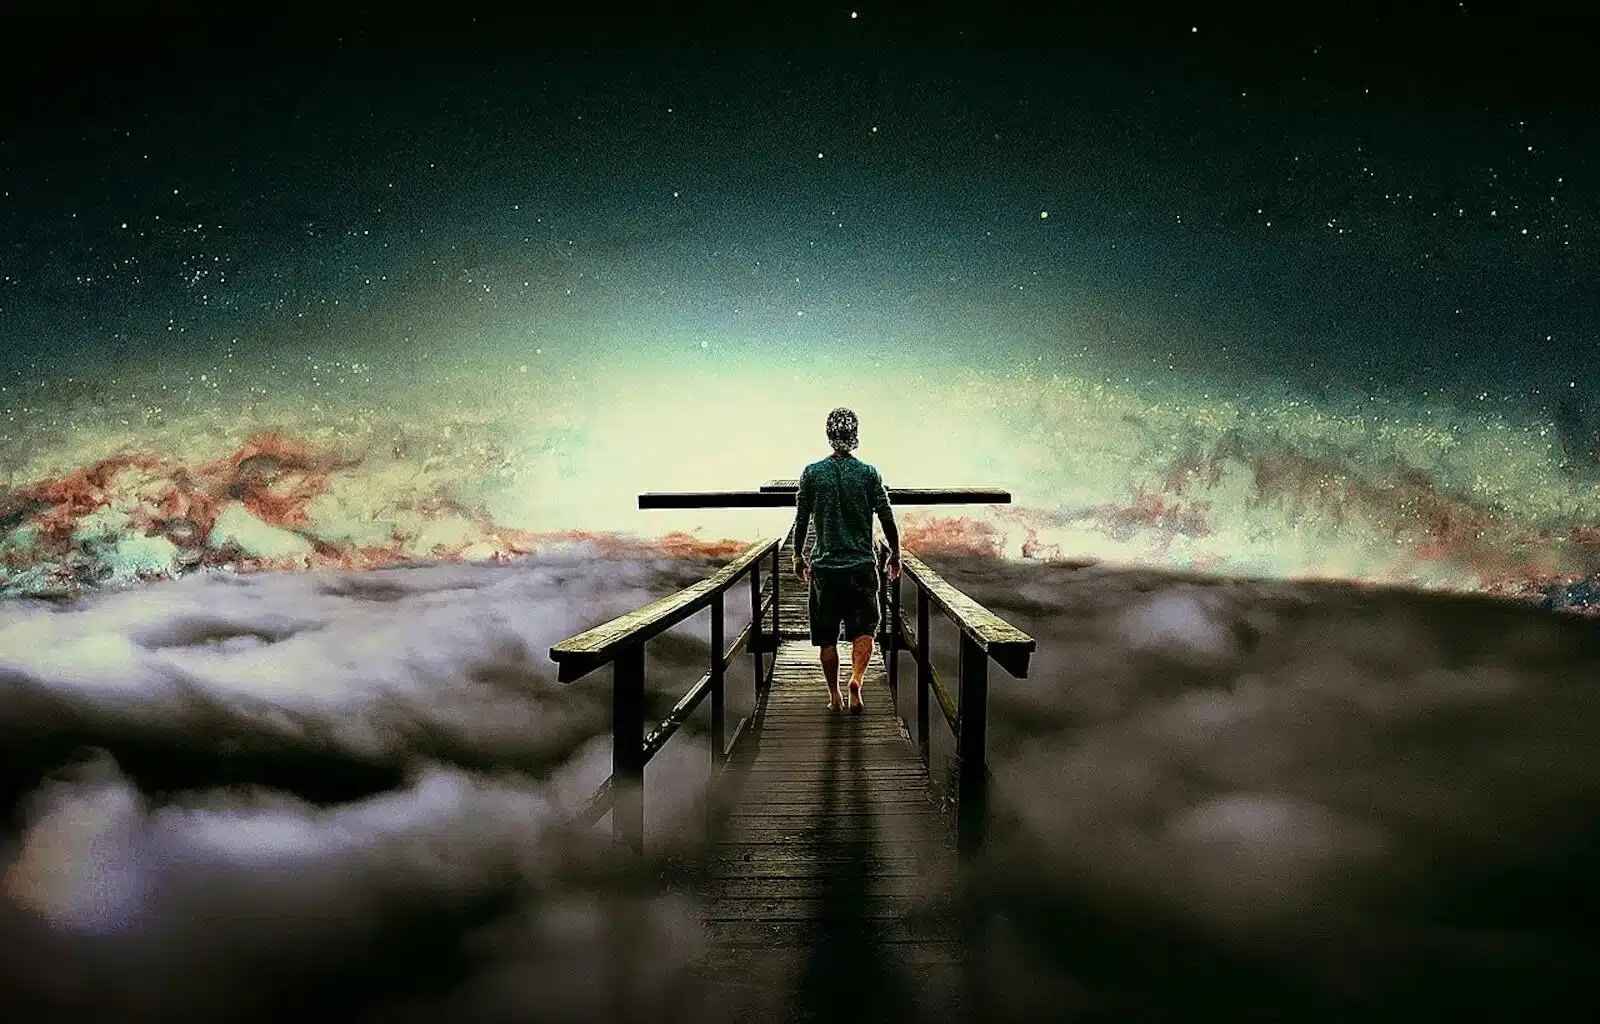 A man standing on a bridge, contemplating life's mysteries under a cloudy sky